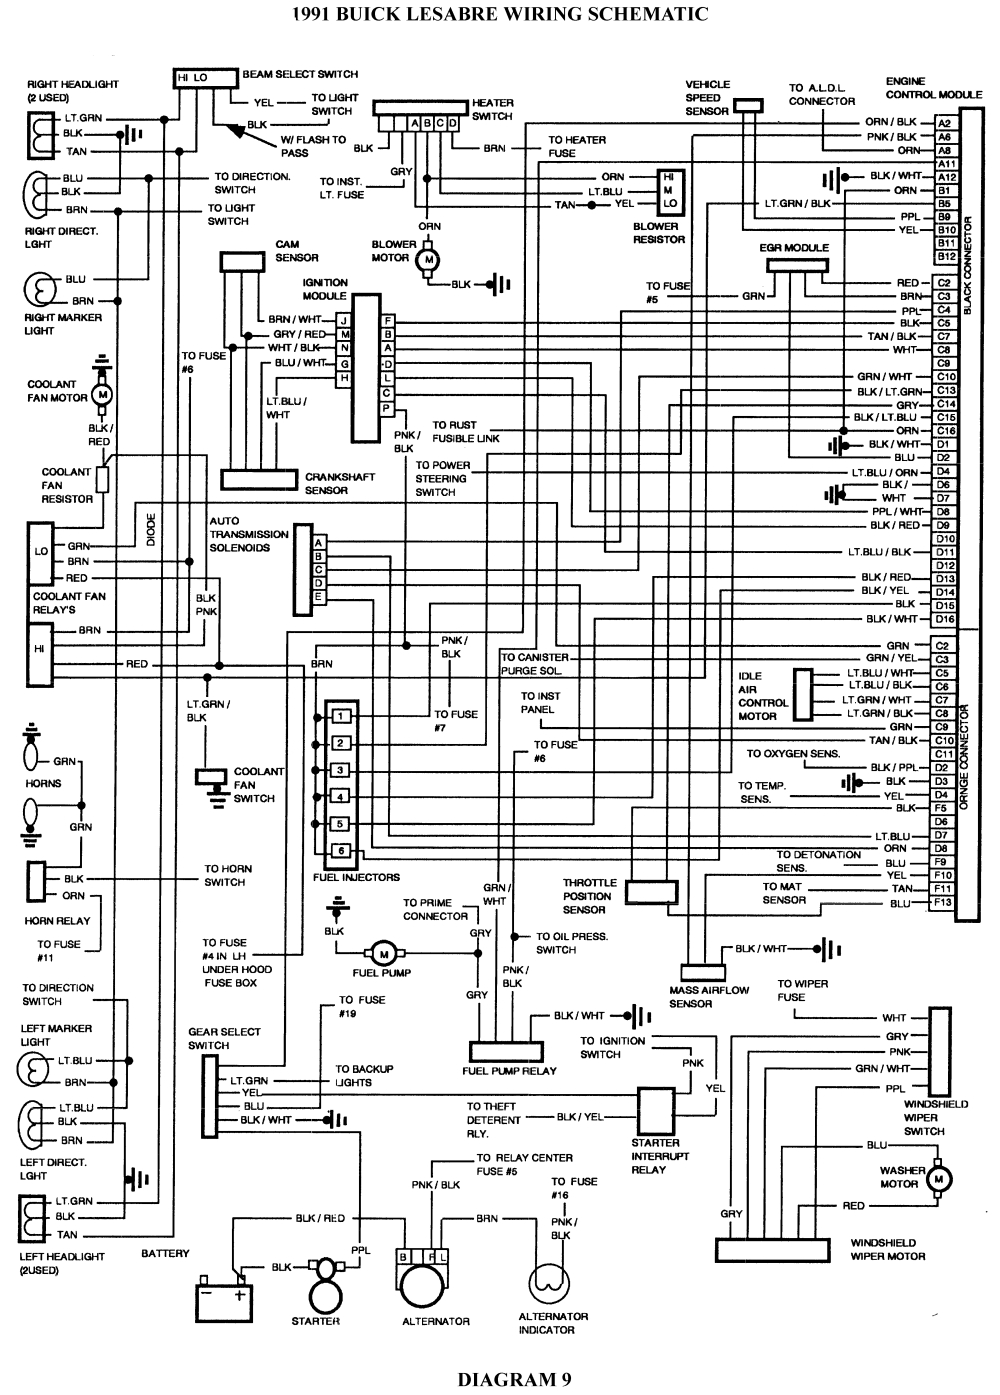 1991 honda civic electrical wiring diagram and schematics Download-Fig 18-s